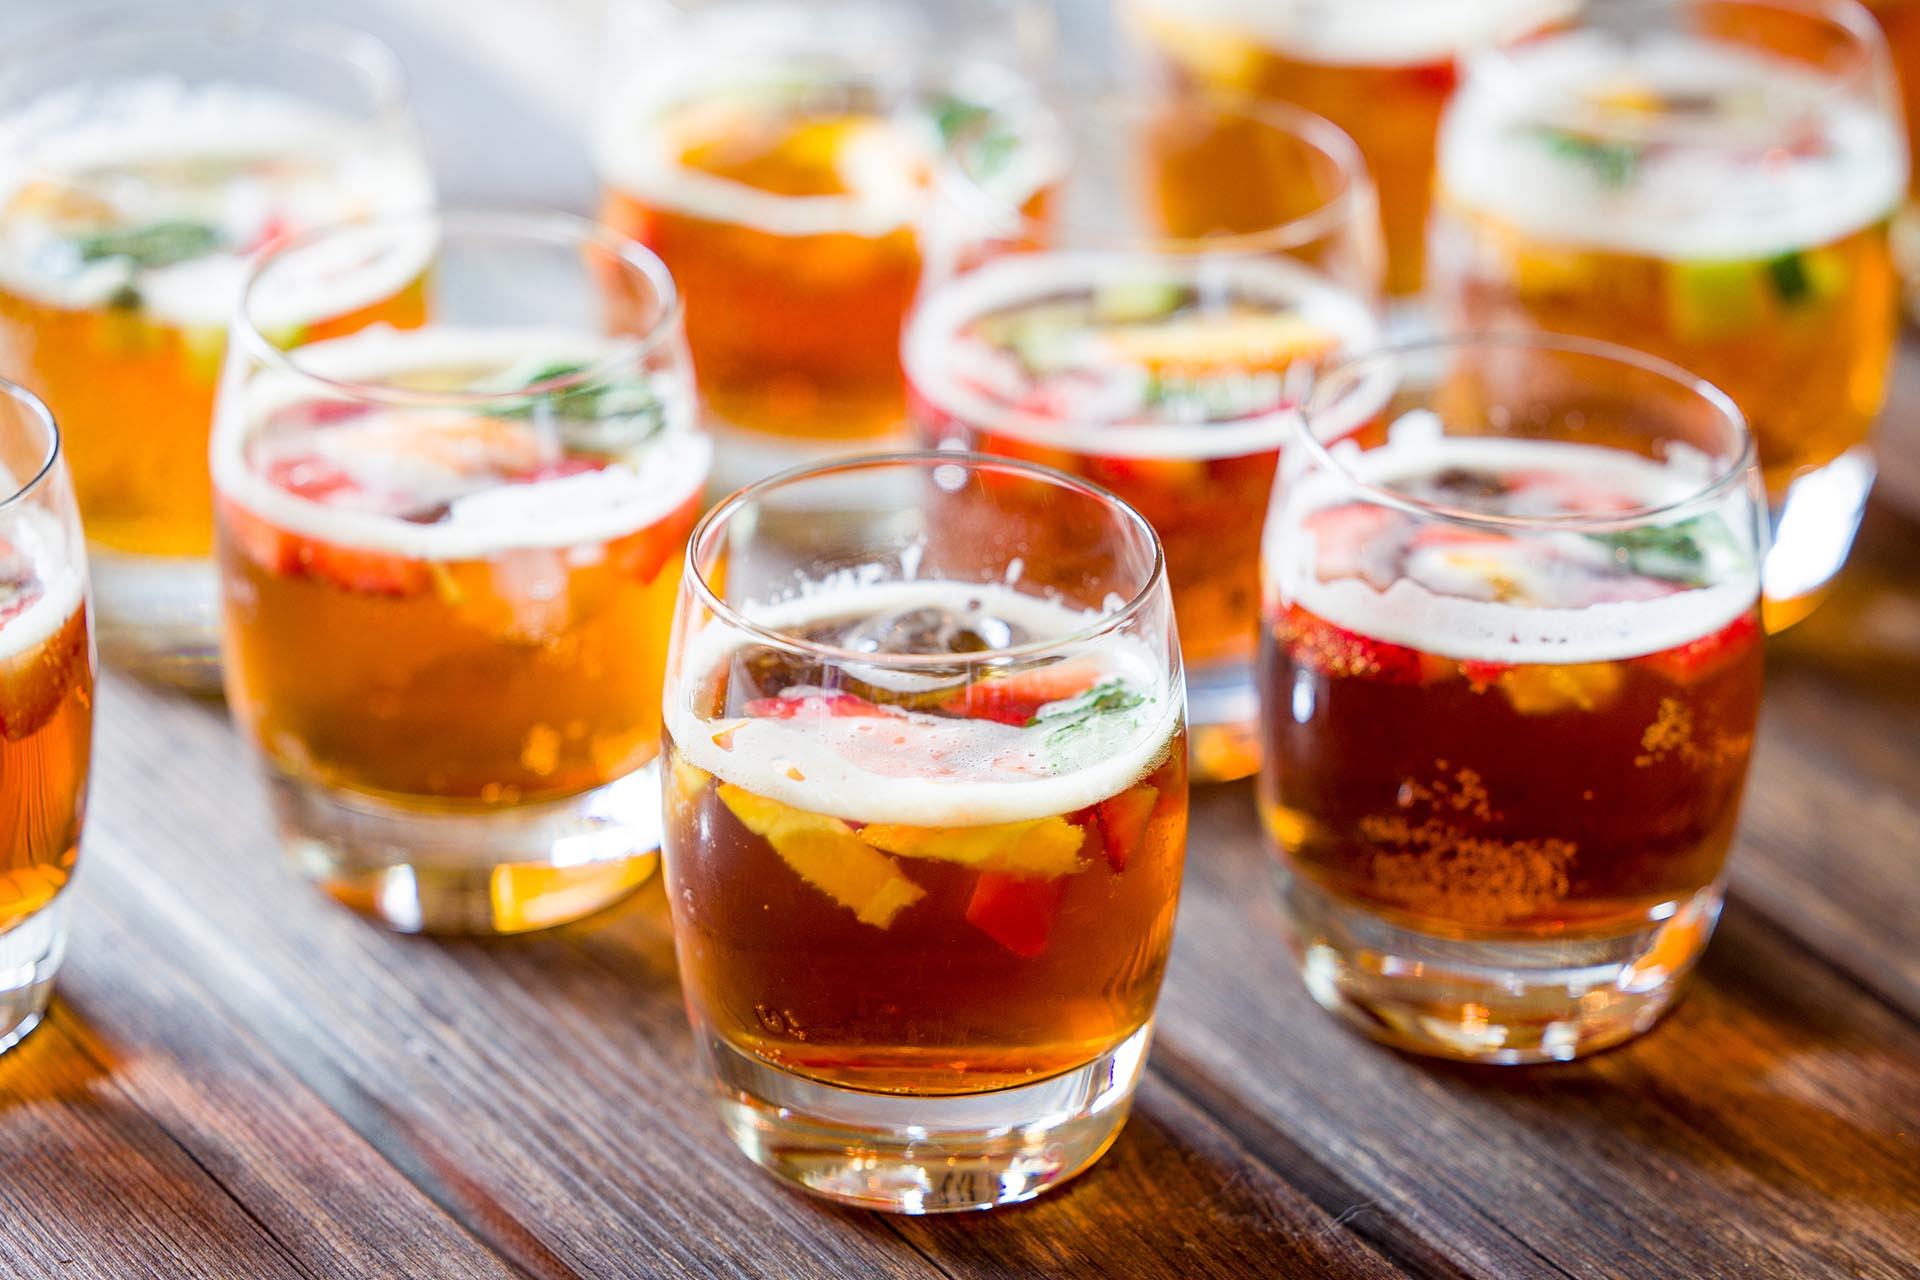 Glasses of Pimms by Essex wedding photographer